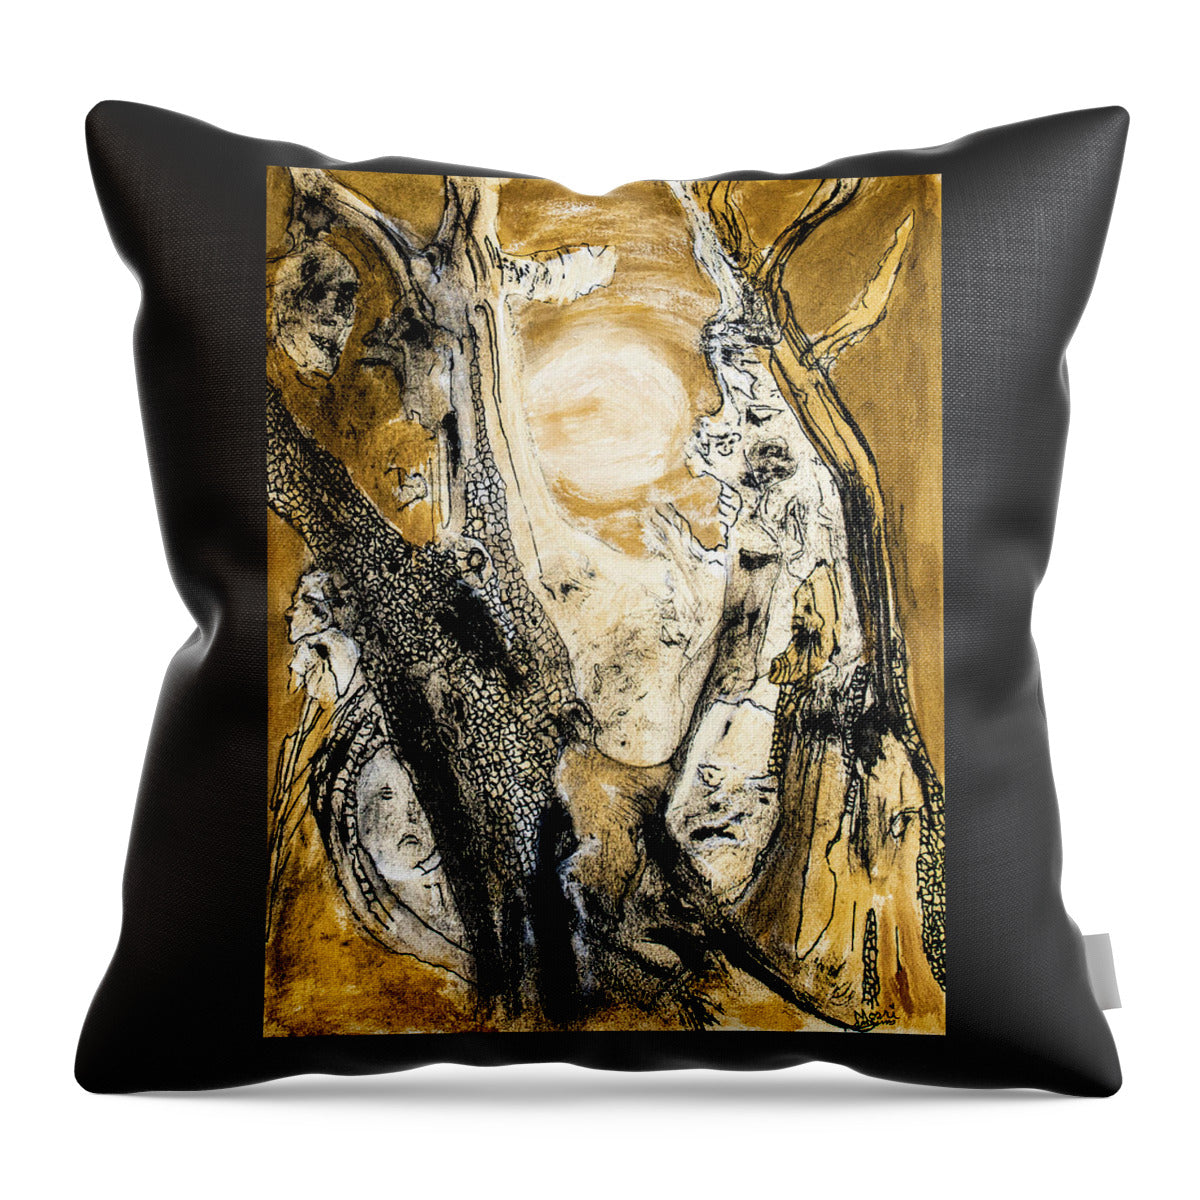 Secrets of the Yellow Moon 4 - Throw Pillow